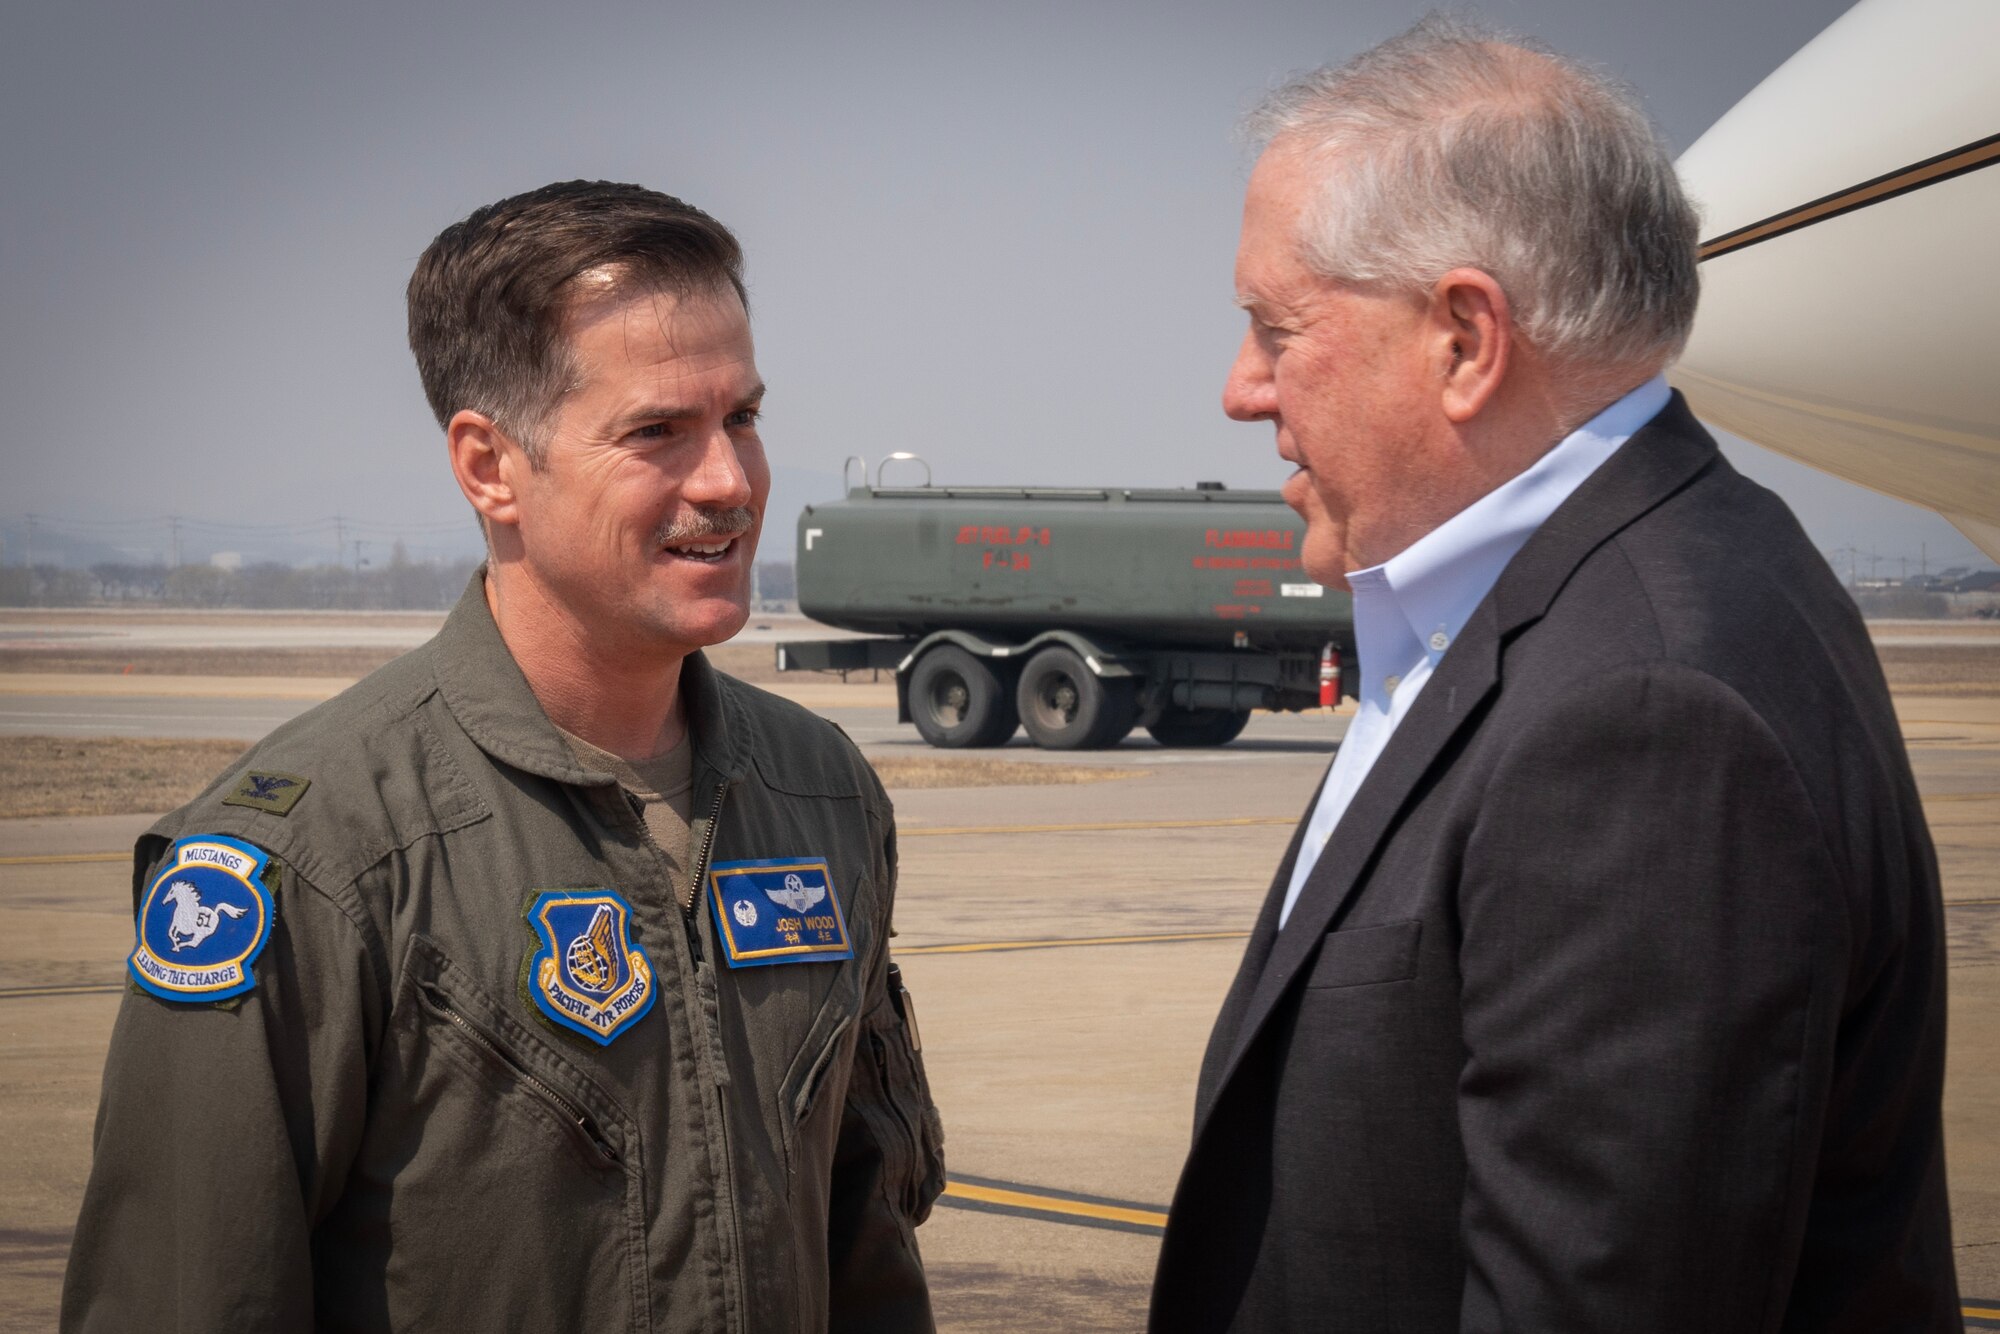 U.S. Air Force Col. Joshua Wood, 51st Fighter Wing commander, greets Secretary of the Air Force Frank Kendall after his arrival to Osan Air Base, Republic of Korea, on March 19, 2023.